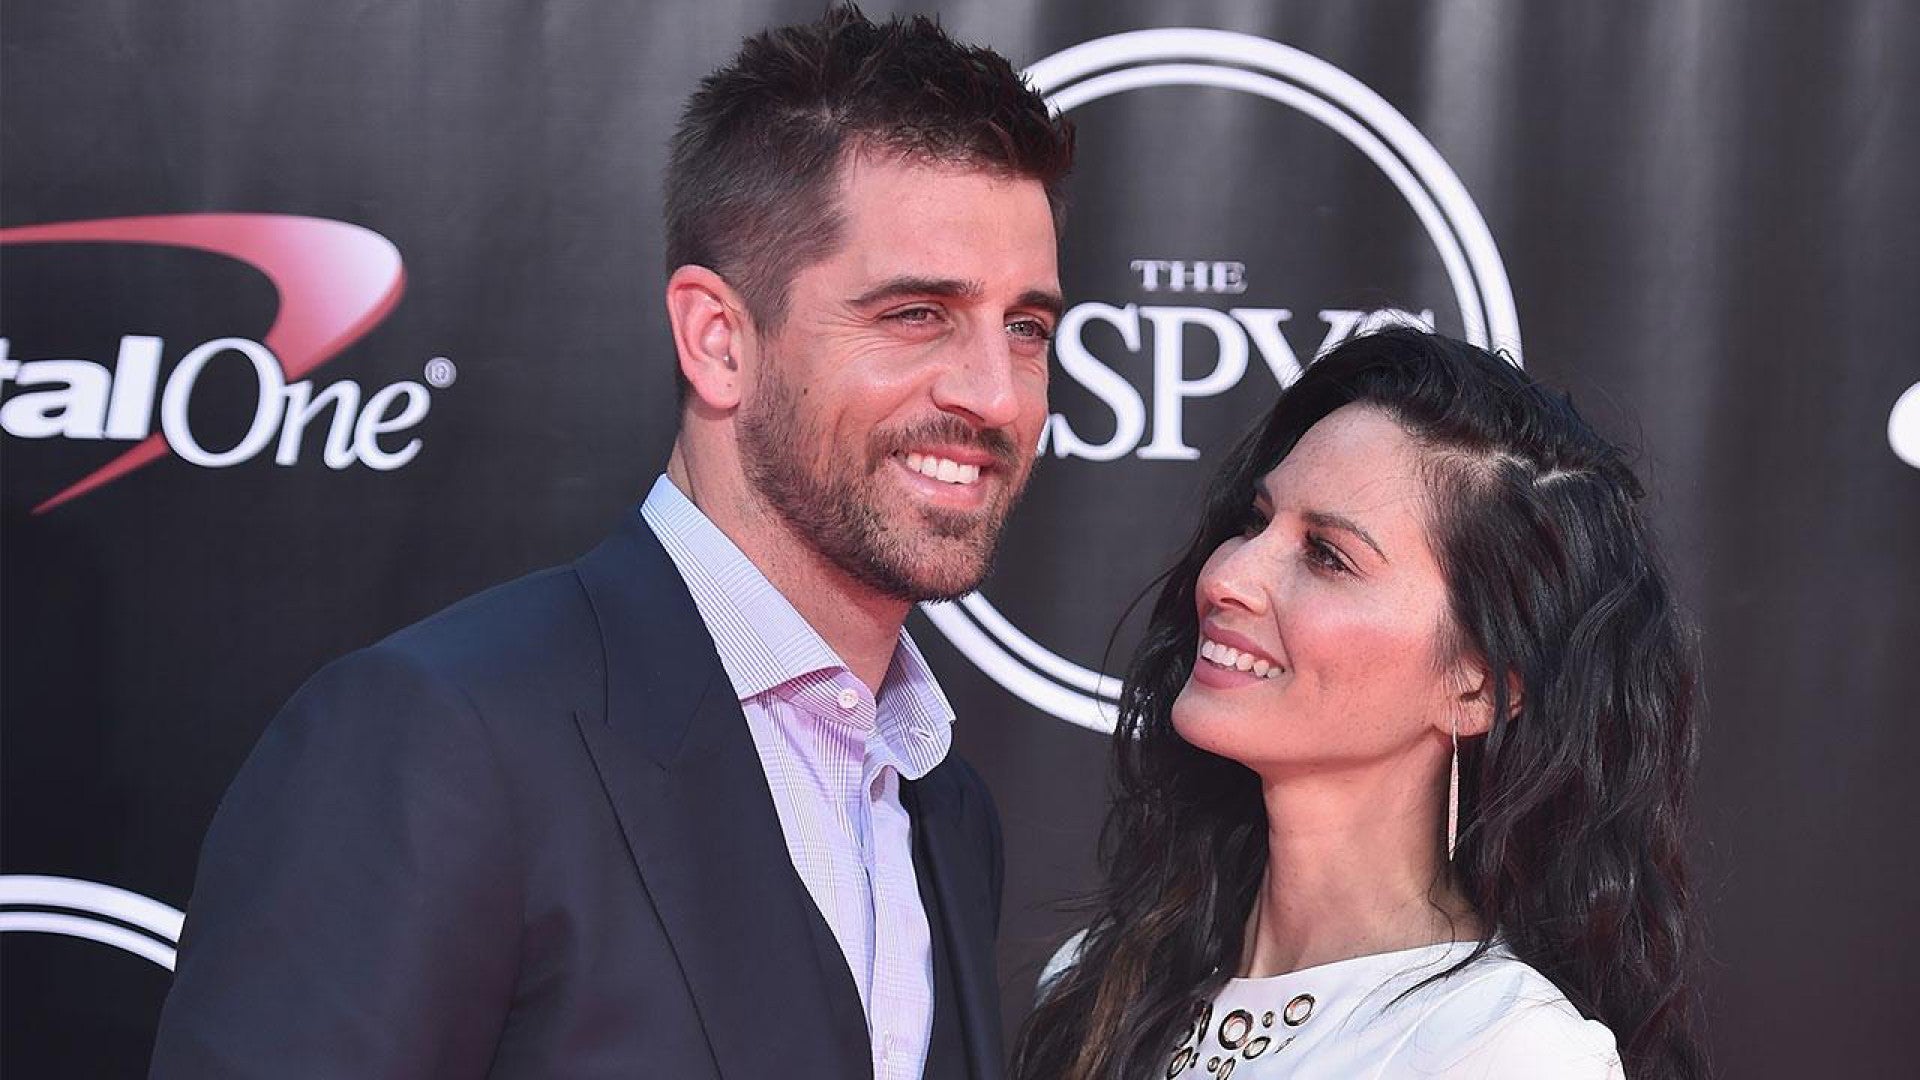 Aaron Rodgers family feud appears to keep him estranged at